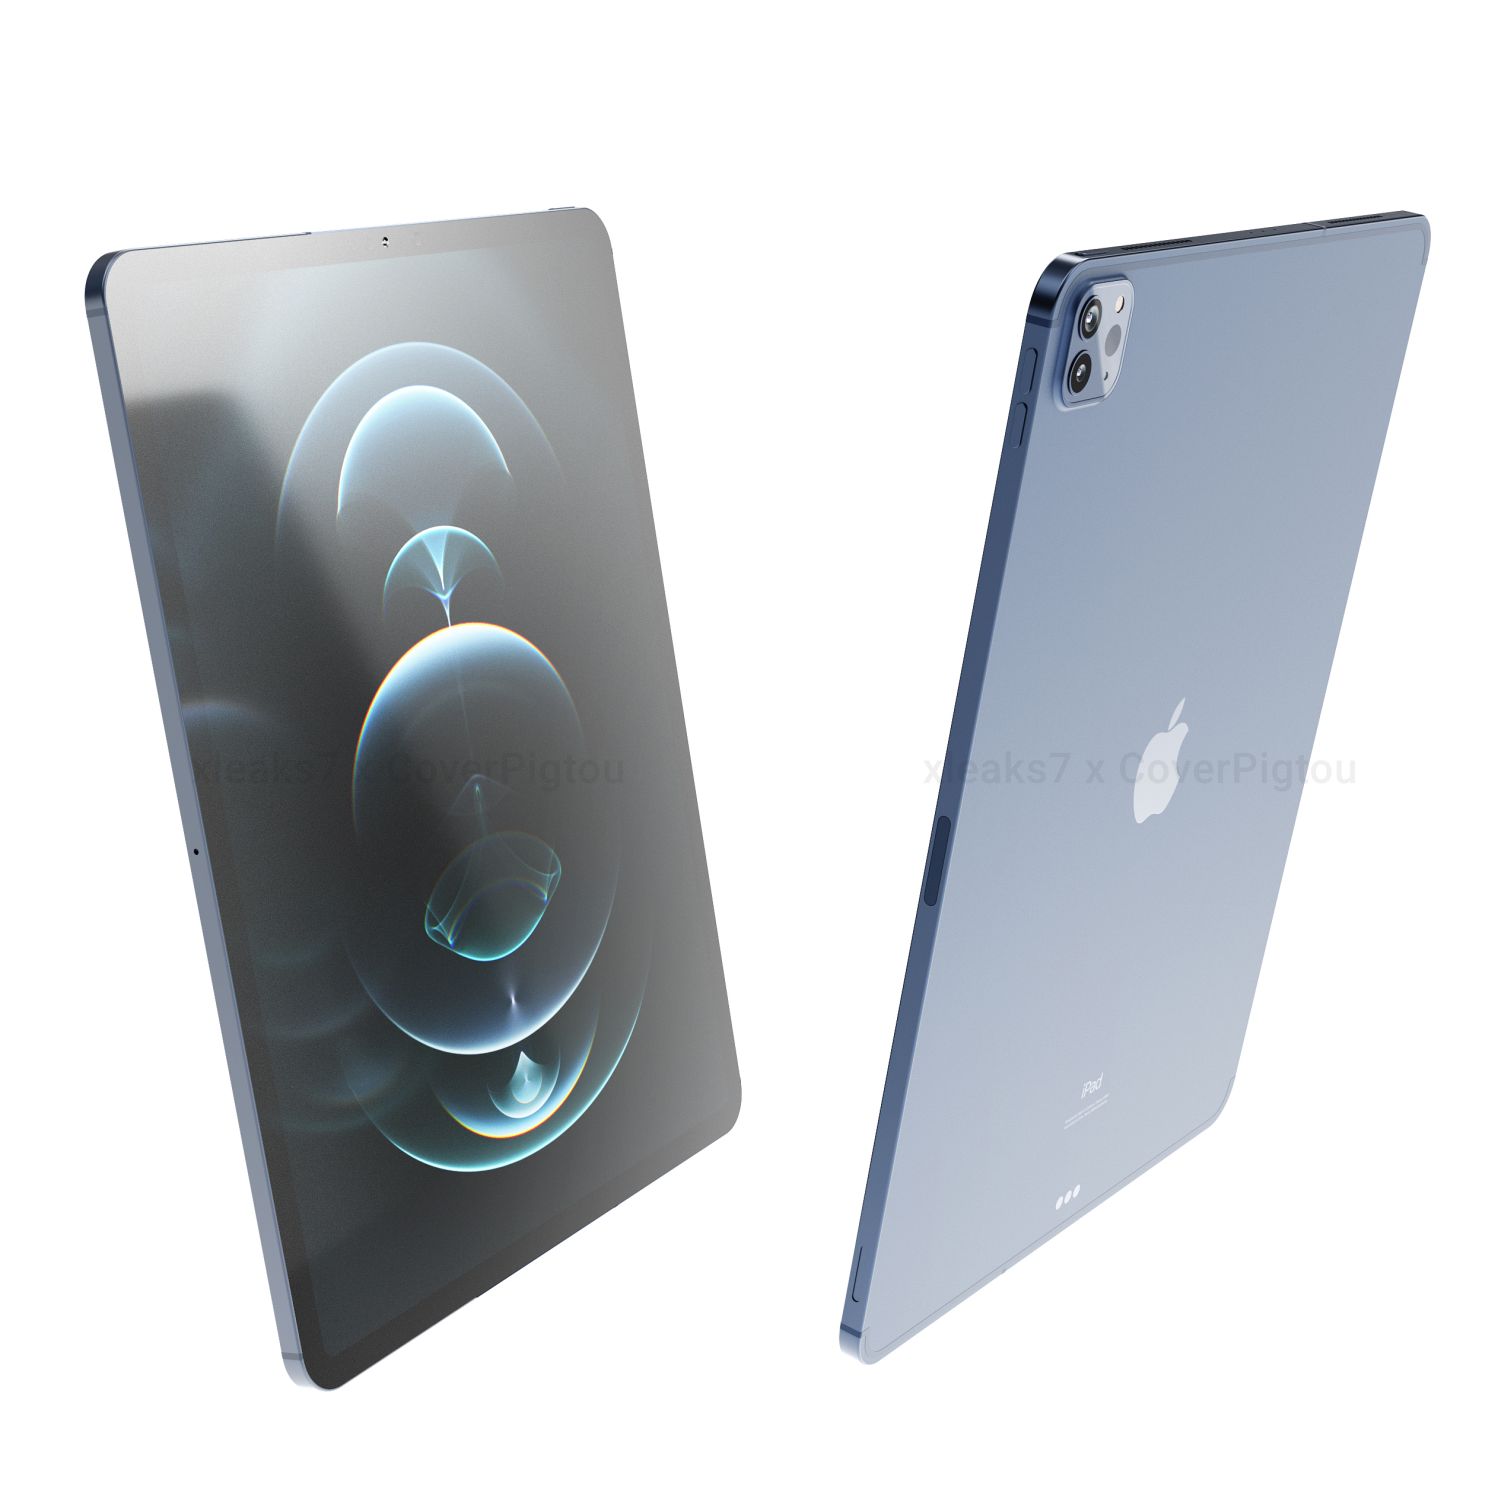 Latest iPad Pro (2021) Renders Leaked, With Familiar ...